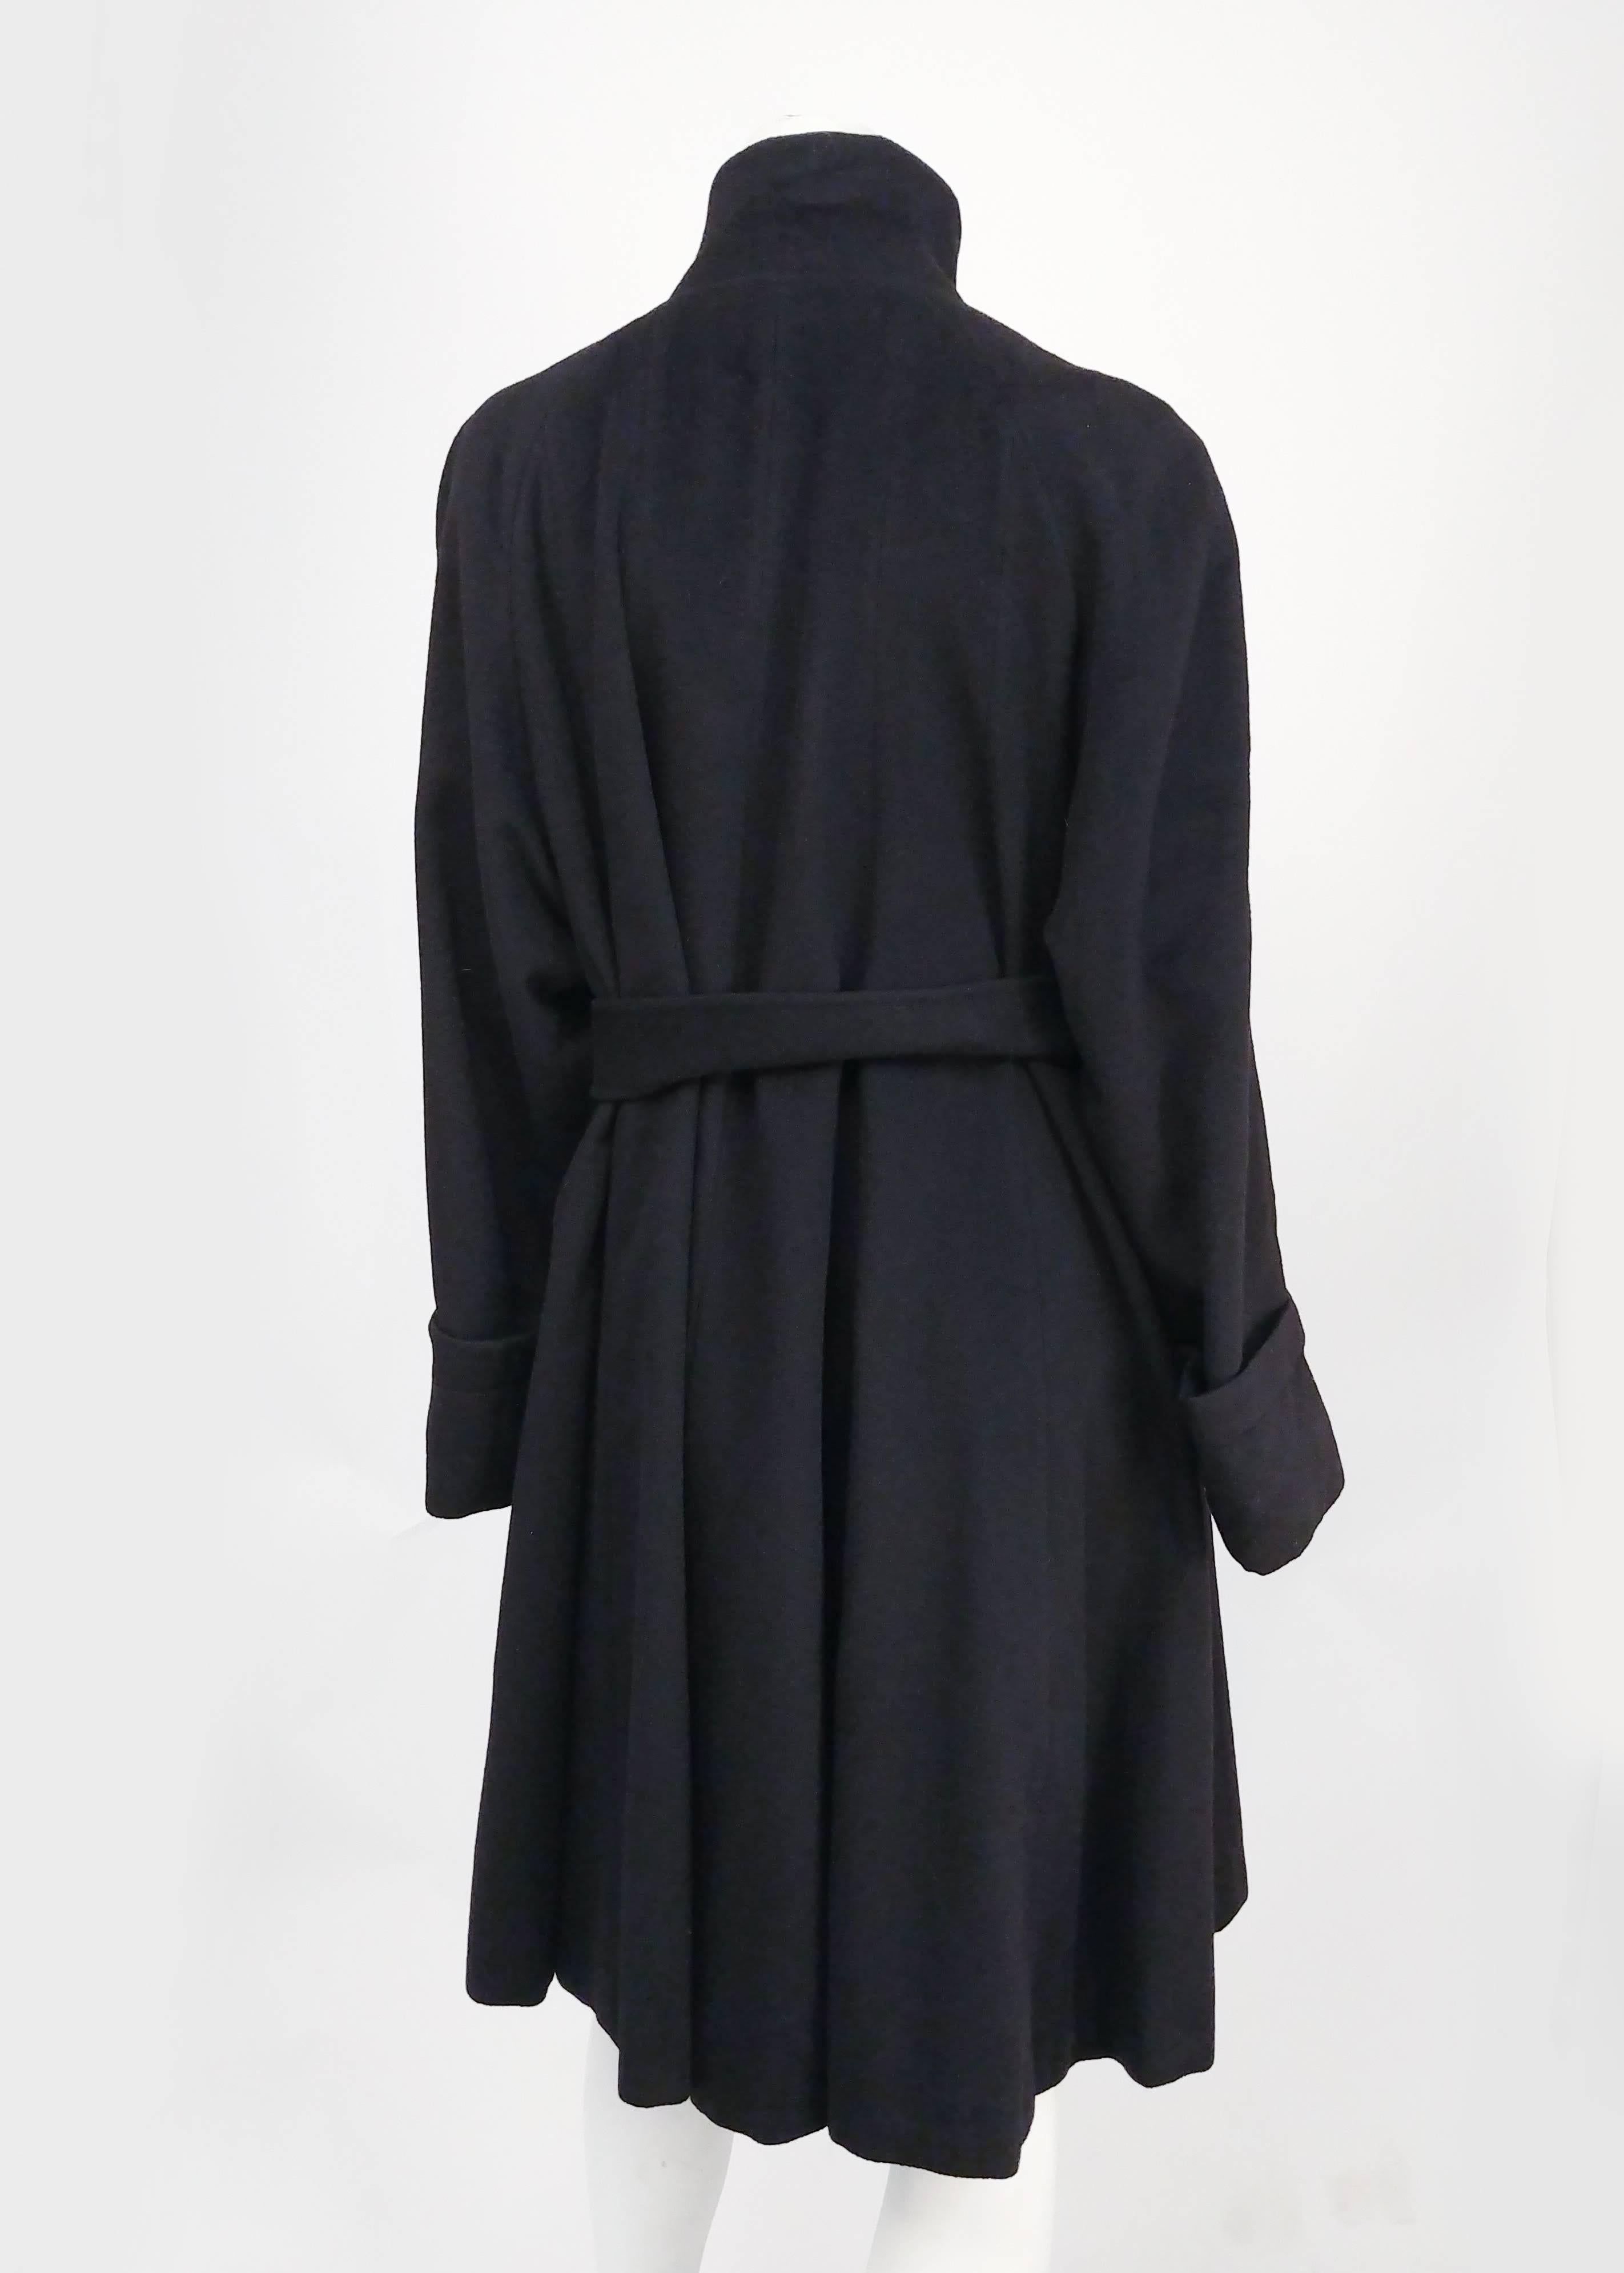 1960s Black Cashmere Wool Coat. Matching waist tie included. Loose, draped fit and A-line silhouette. Hidden buttons at front, high collar. Aprox. size 10-14